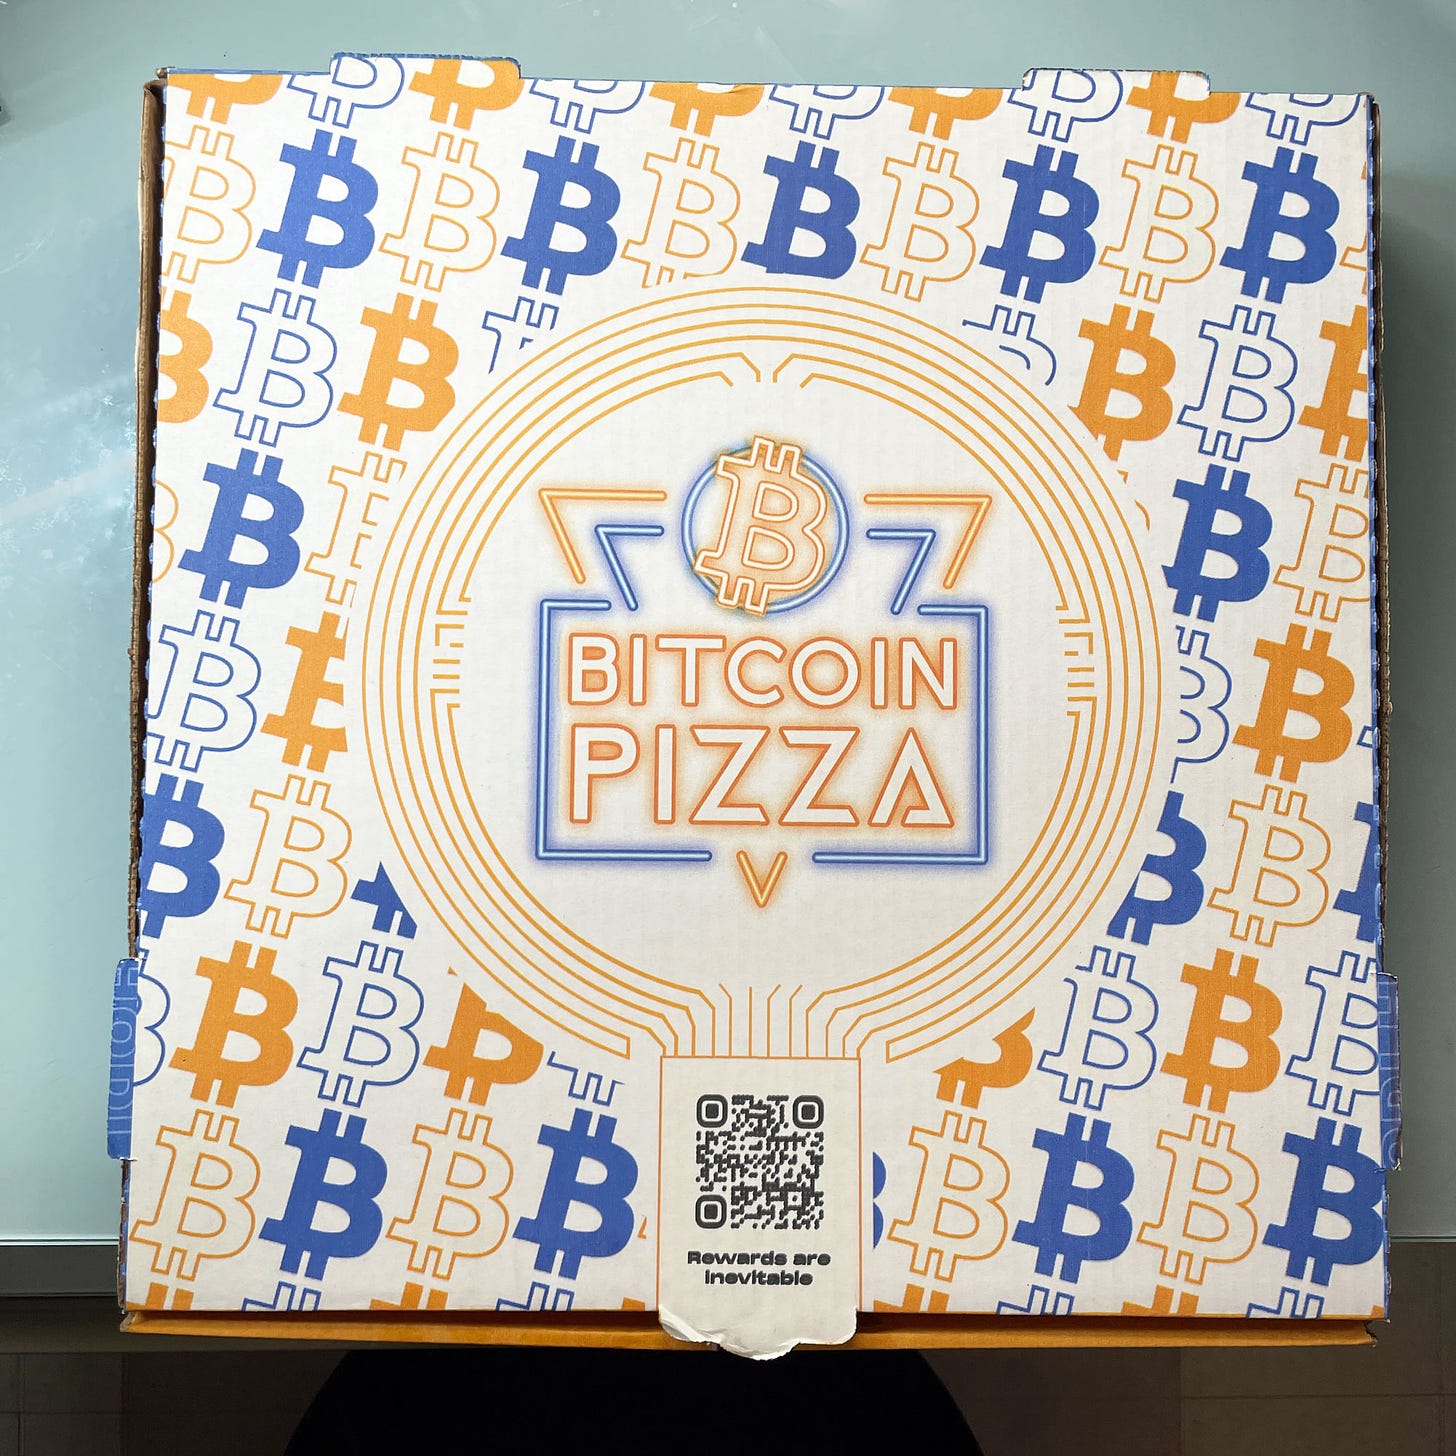 Packaging for Bitcoin Pizza